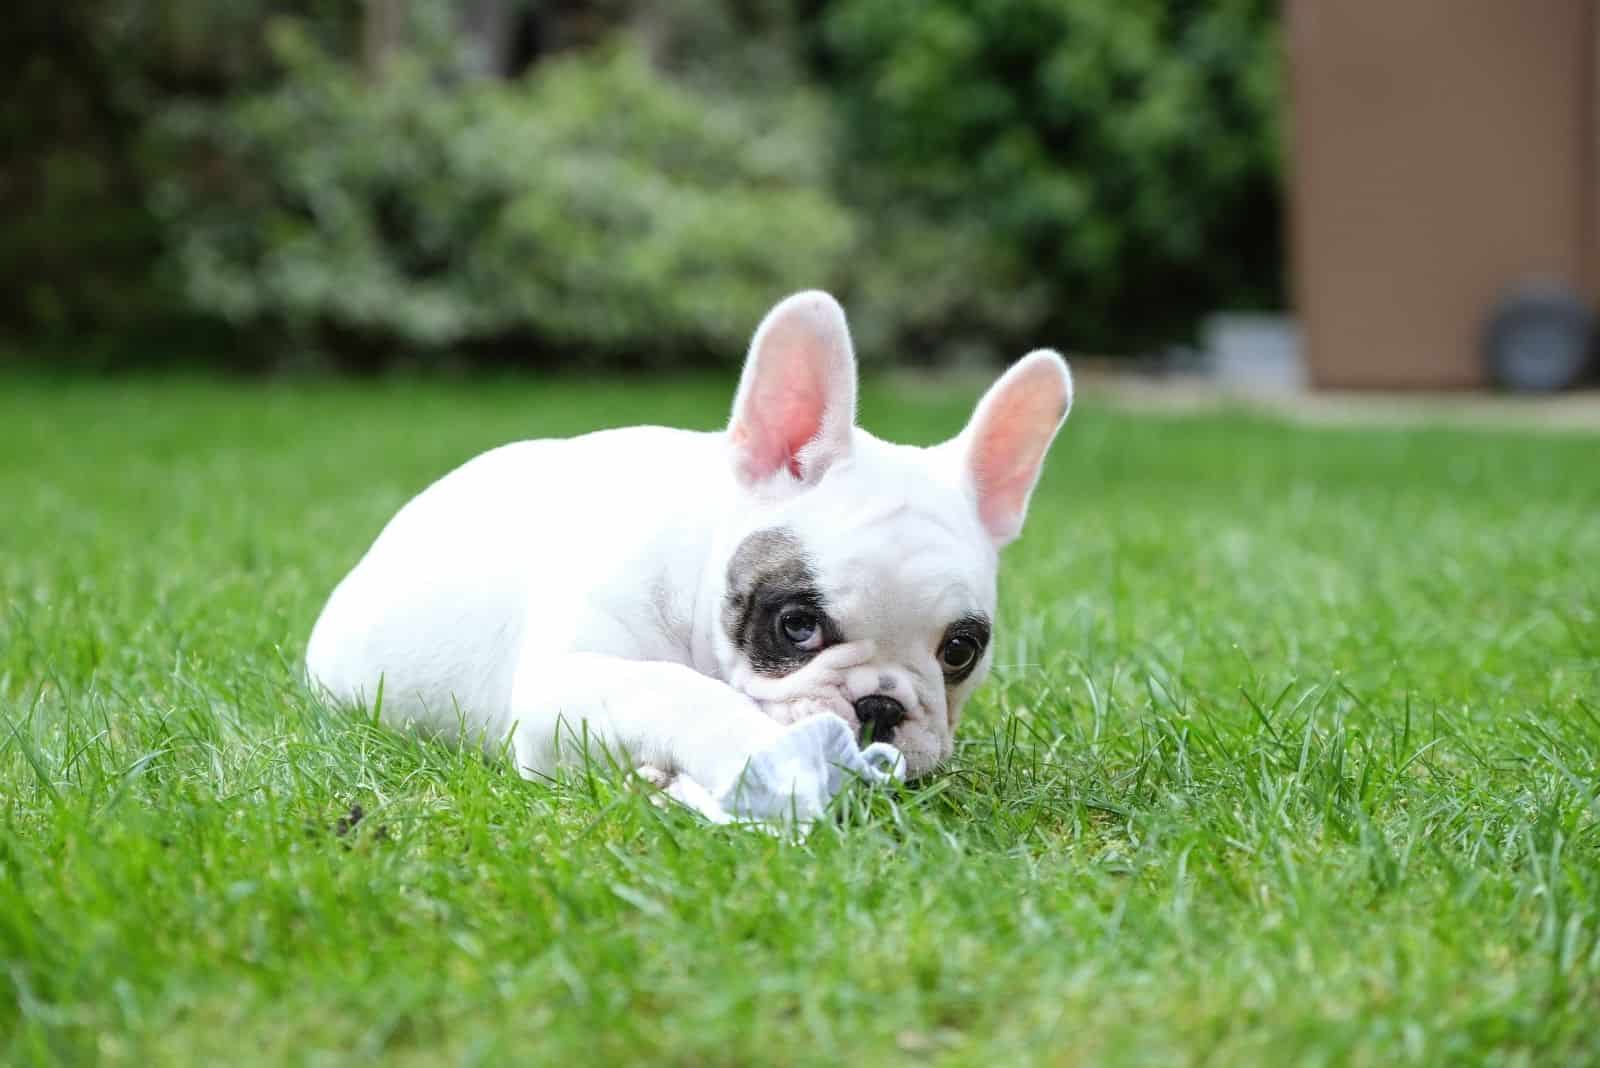 9 weeks old pied frenchie bulldog lying down in the grass lawn